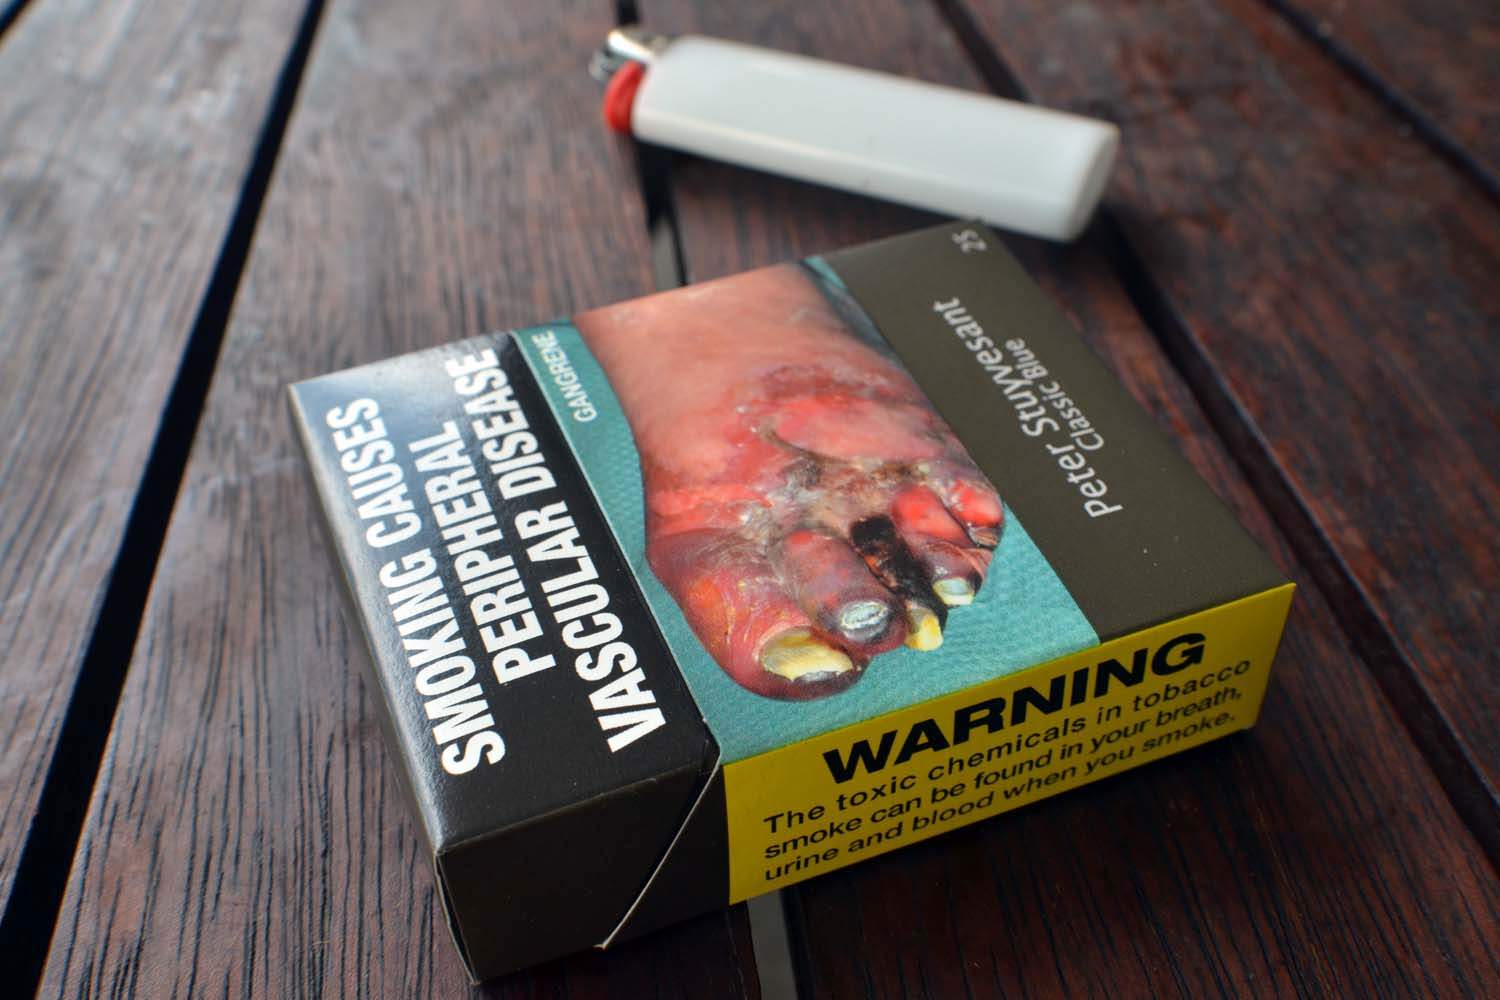 Cheap Tobacco Australia now comes in new packaging.